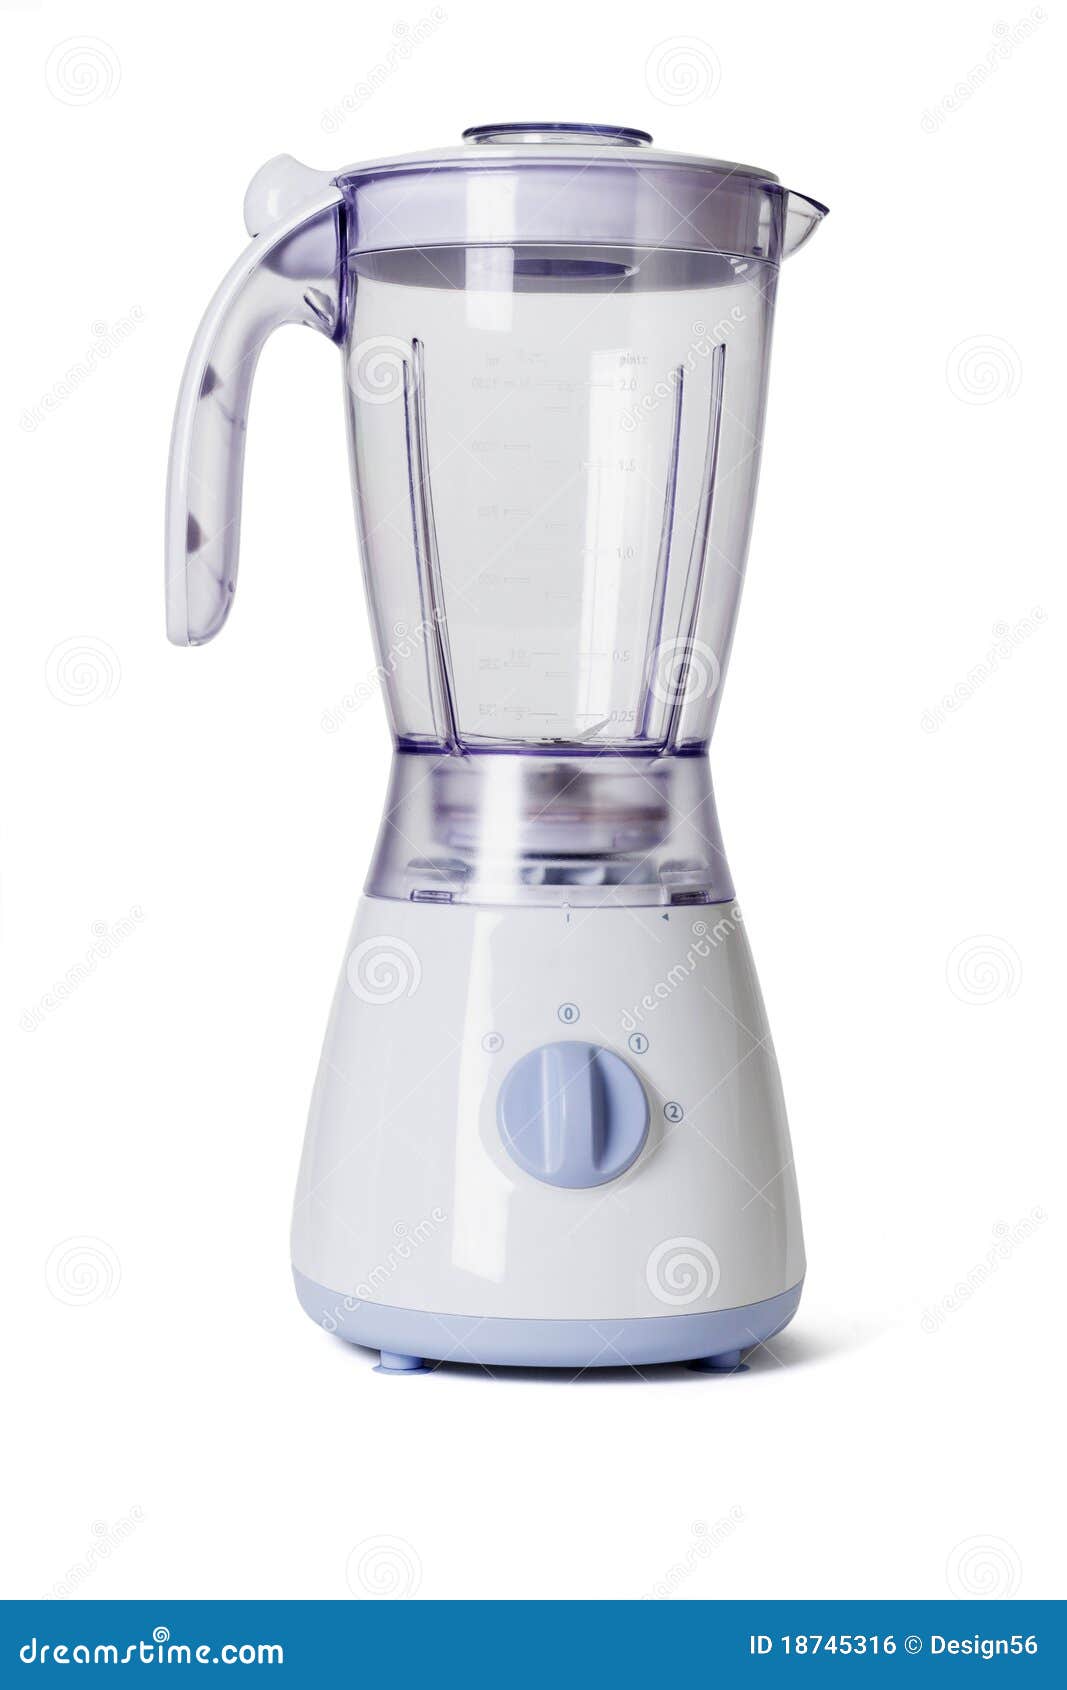 7,506 Electric Blender Stock Photos - Free & Royalty-Free Stock